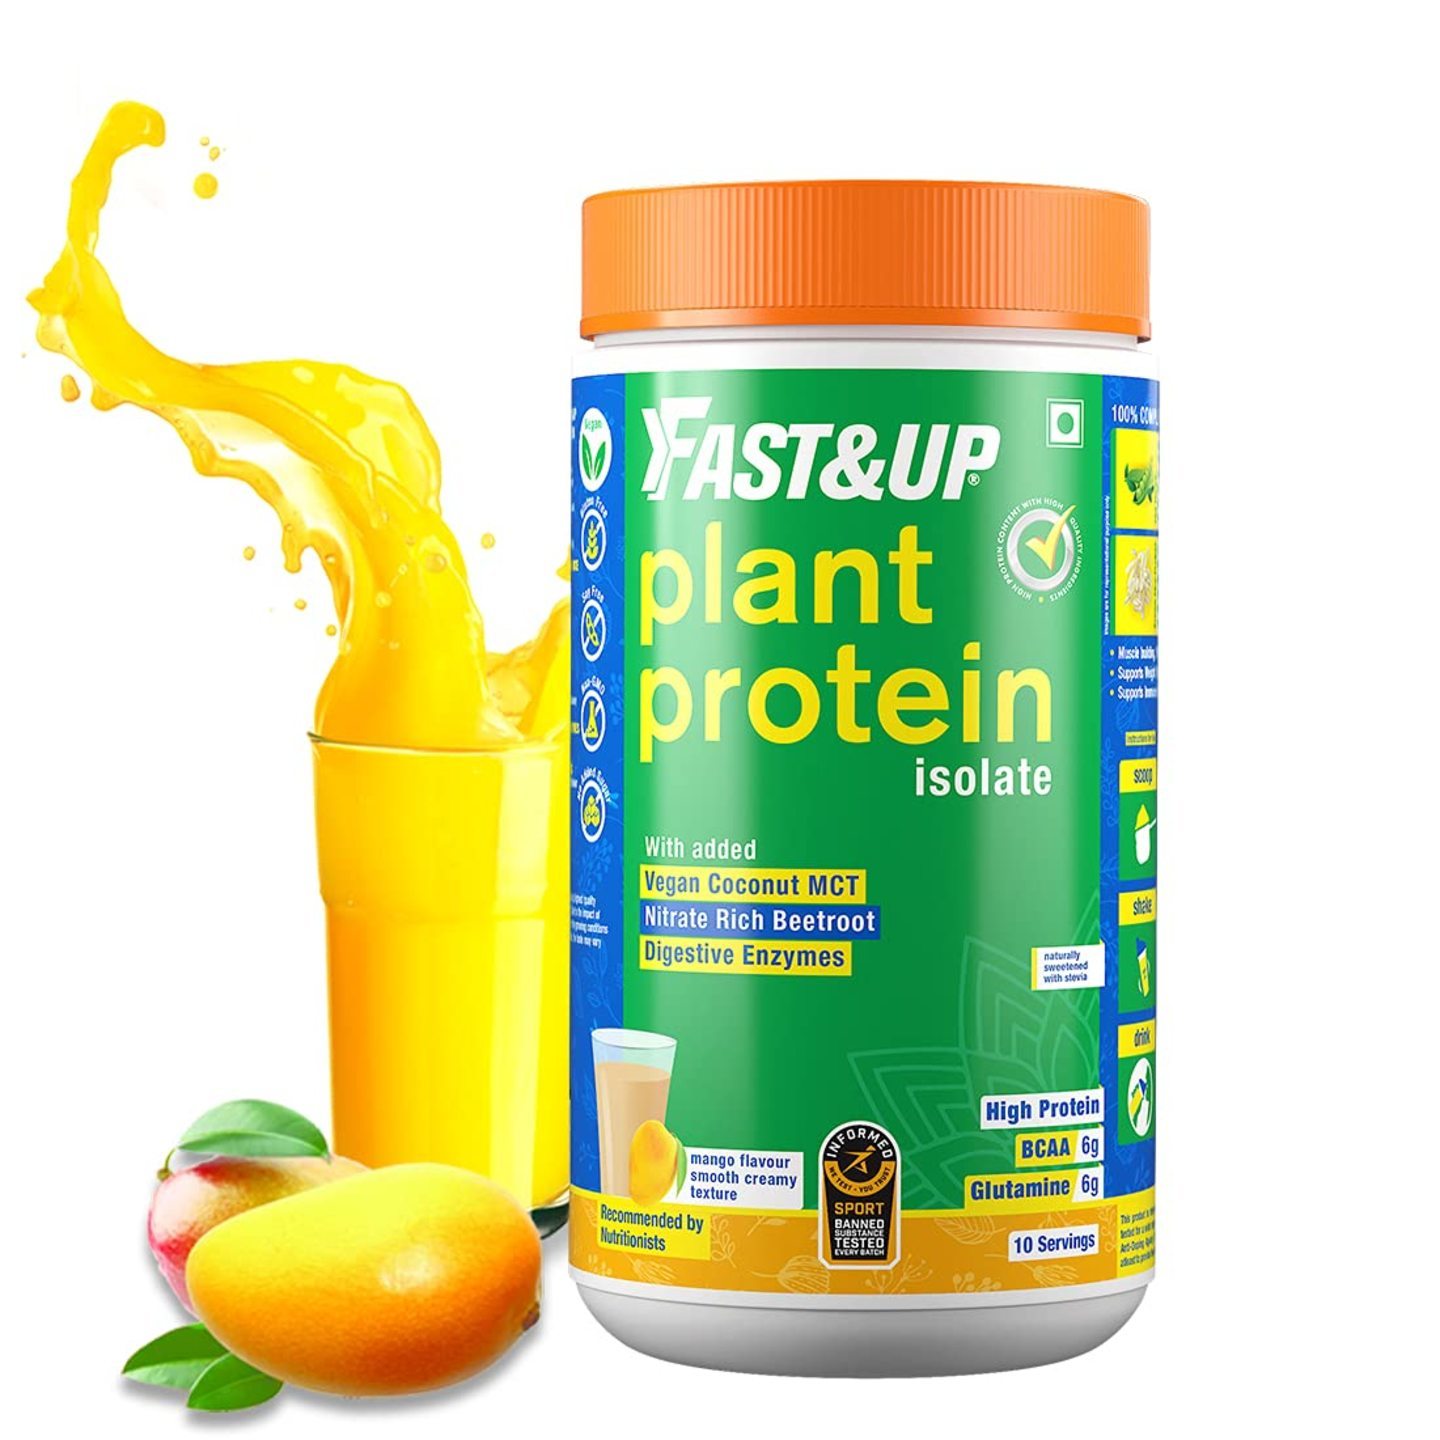 FAST & UP, PLANT PROTEIN ISOLATE